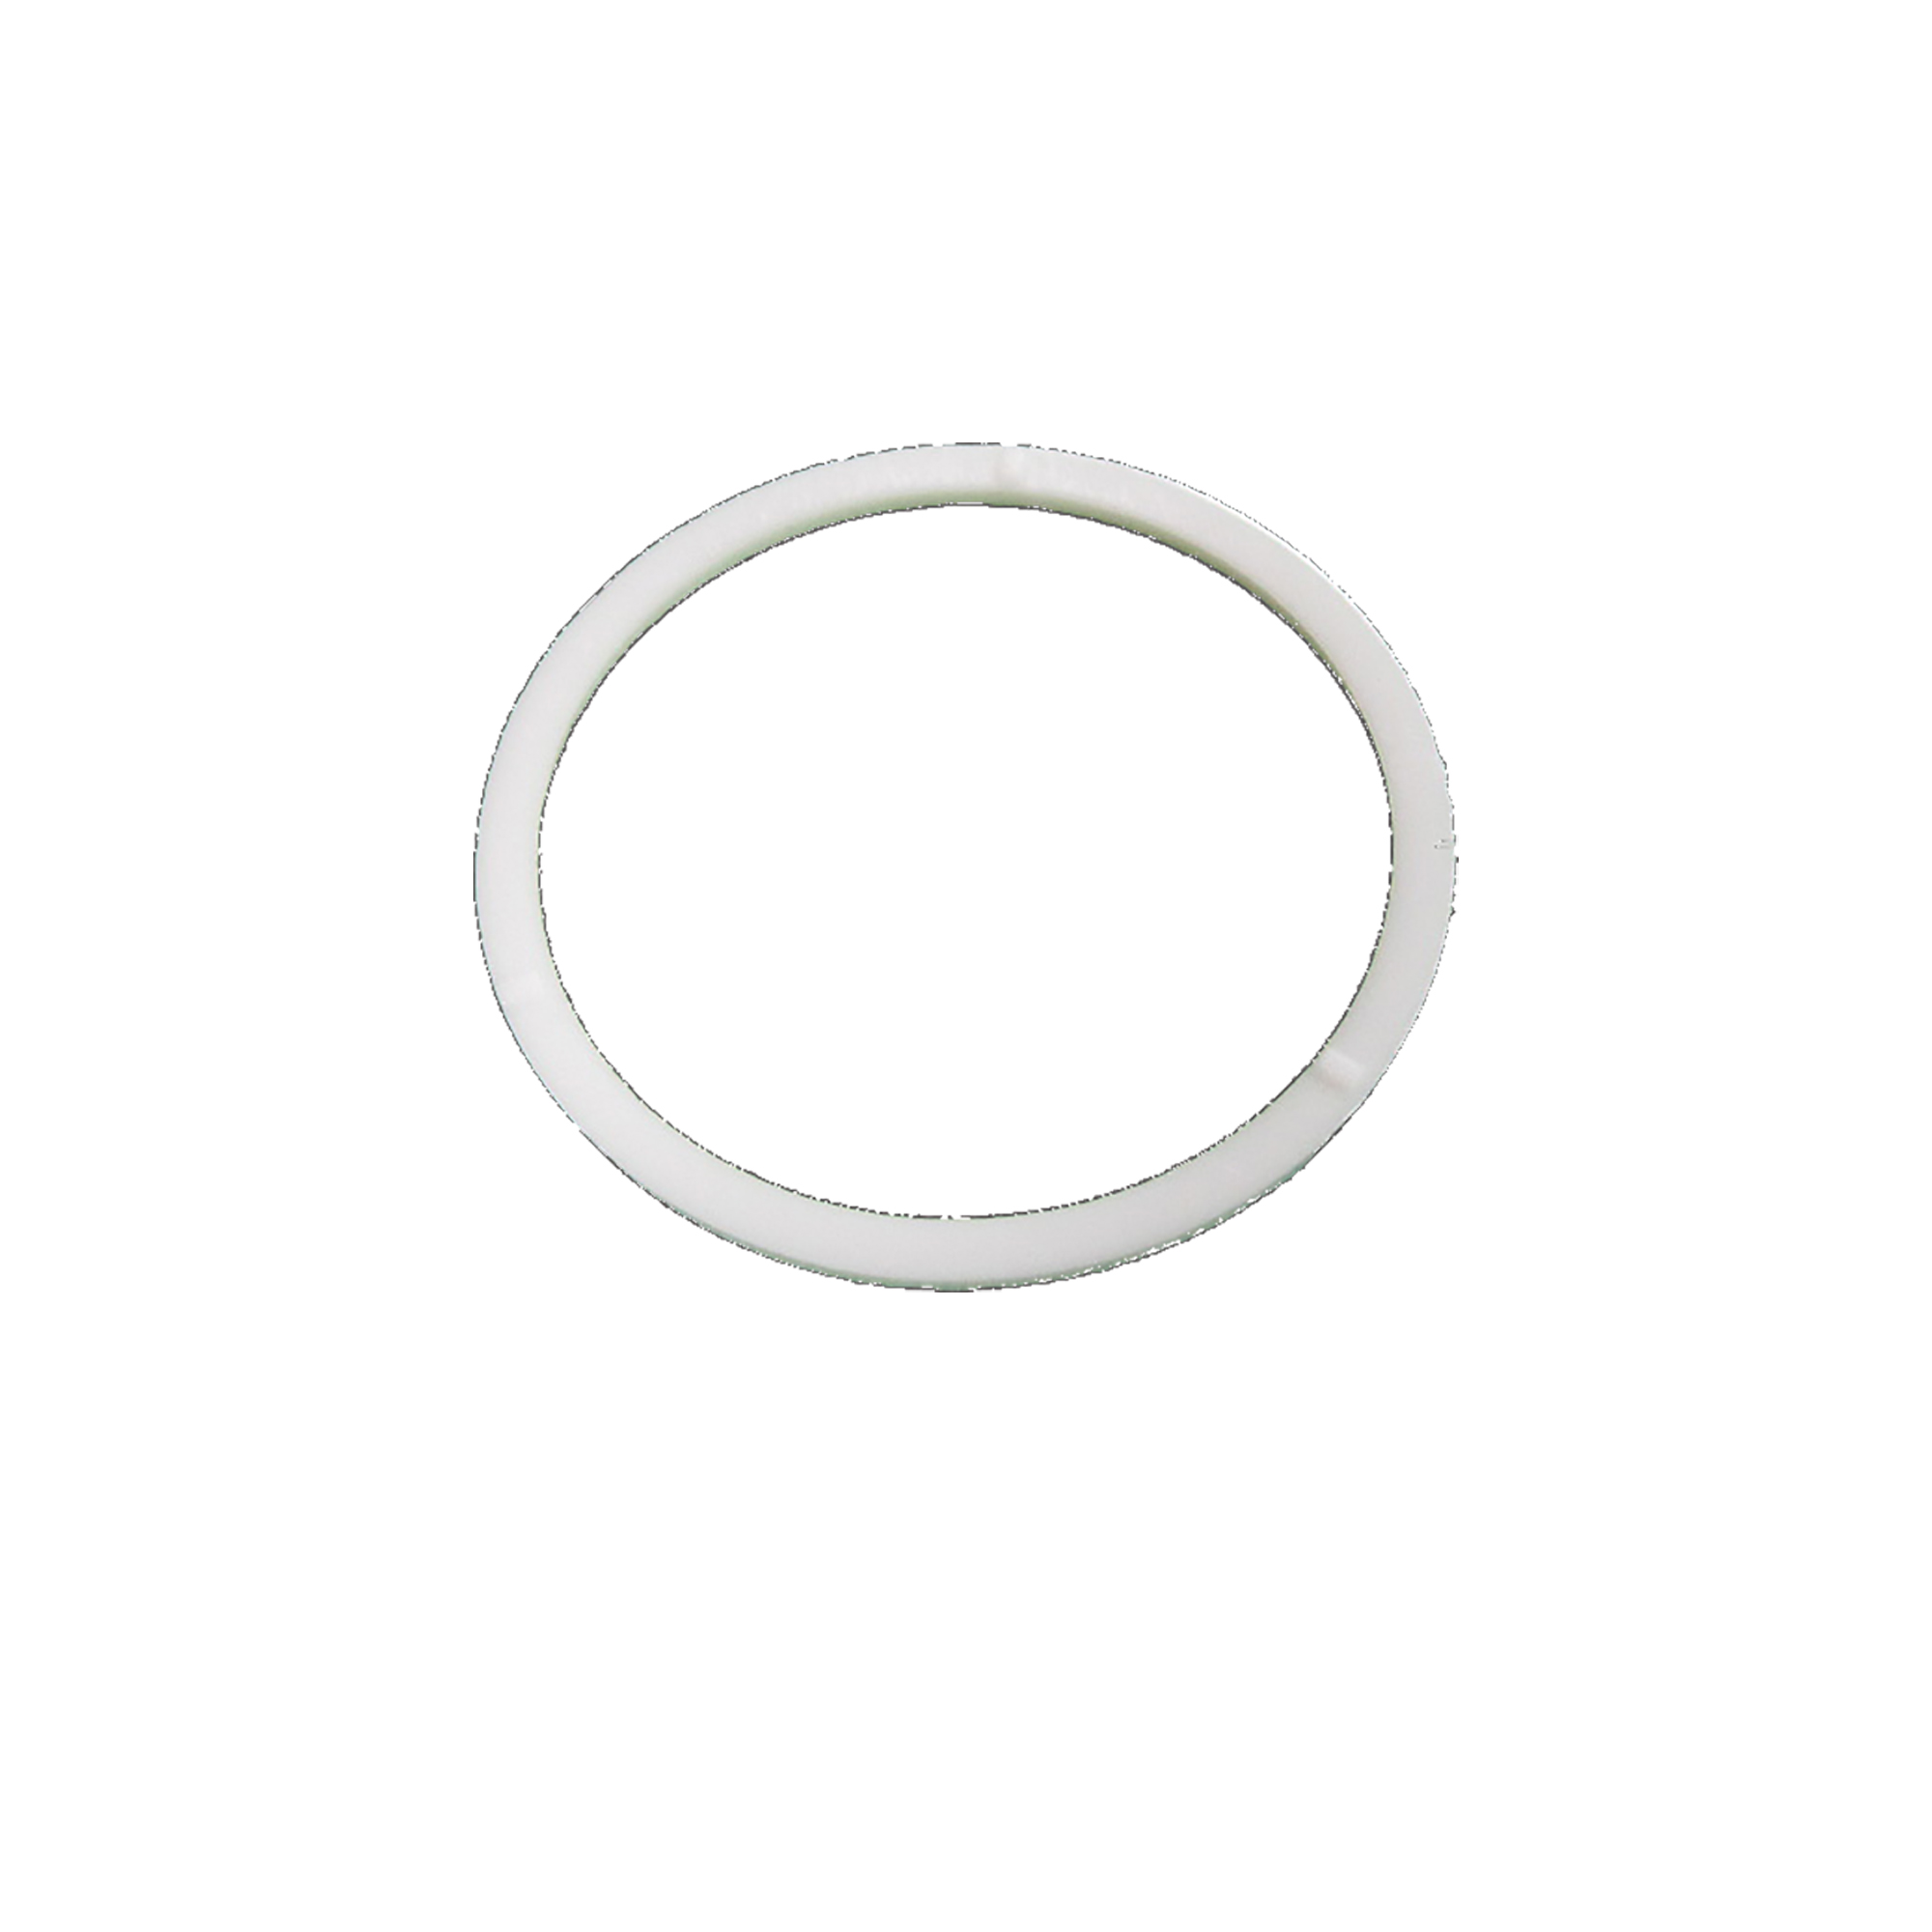 Bearing Washer for Colony Soft Faucet